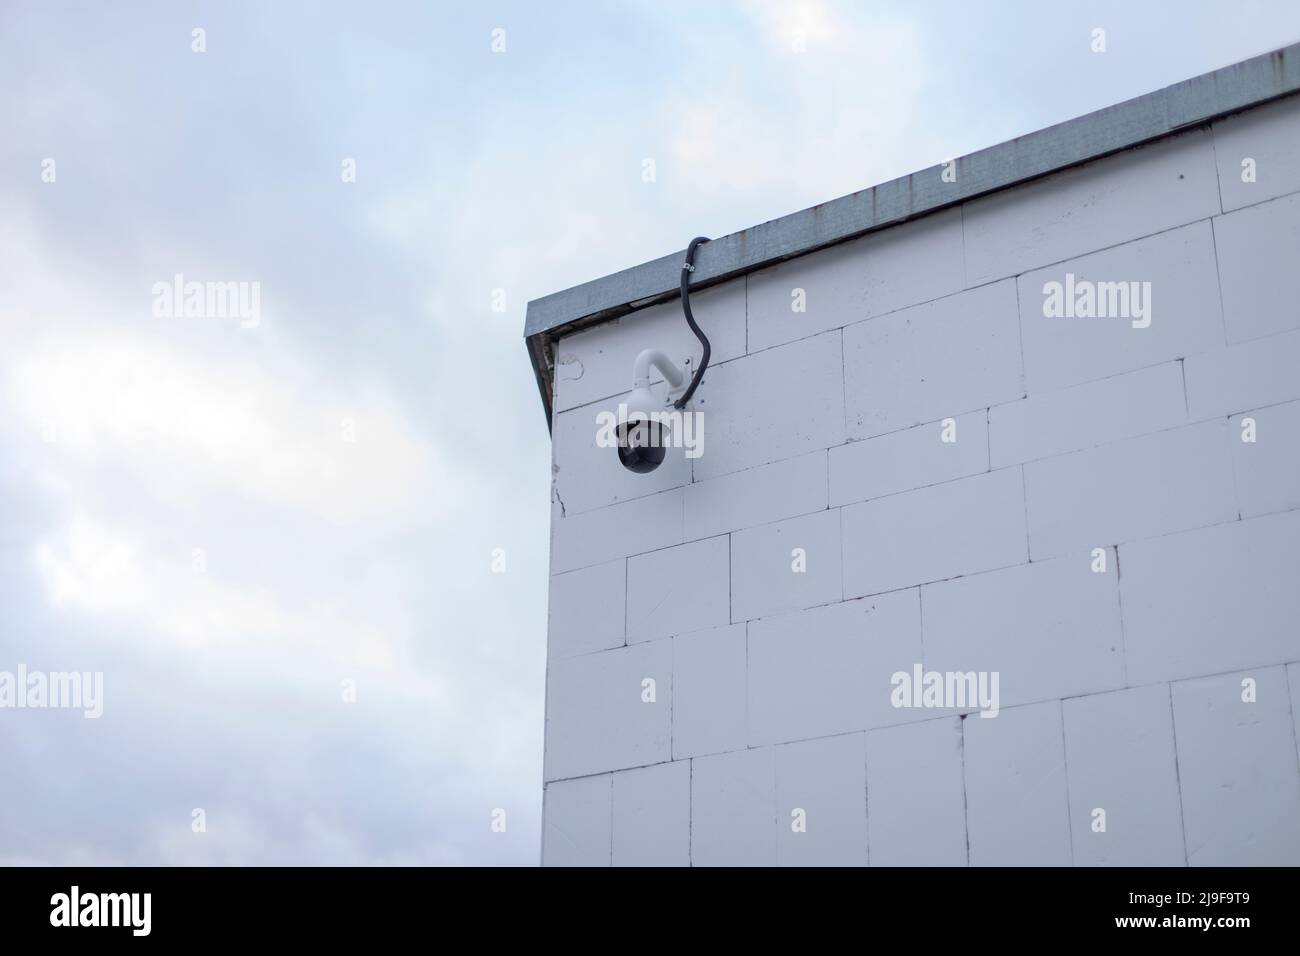 Video camera on corner of building. Video surveillance system. Security camera. Equipment for shooting street. Image capture system. Stock Photo